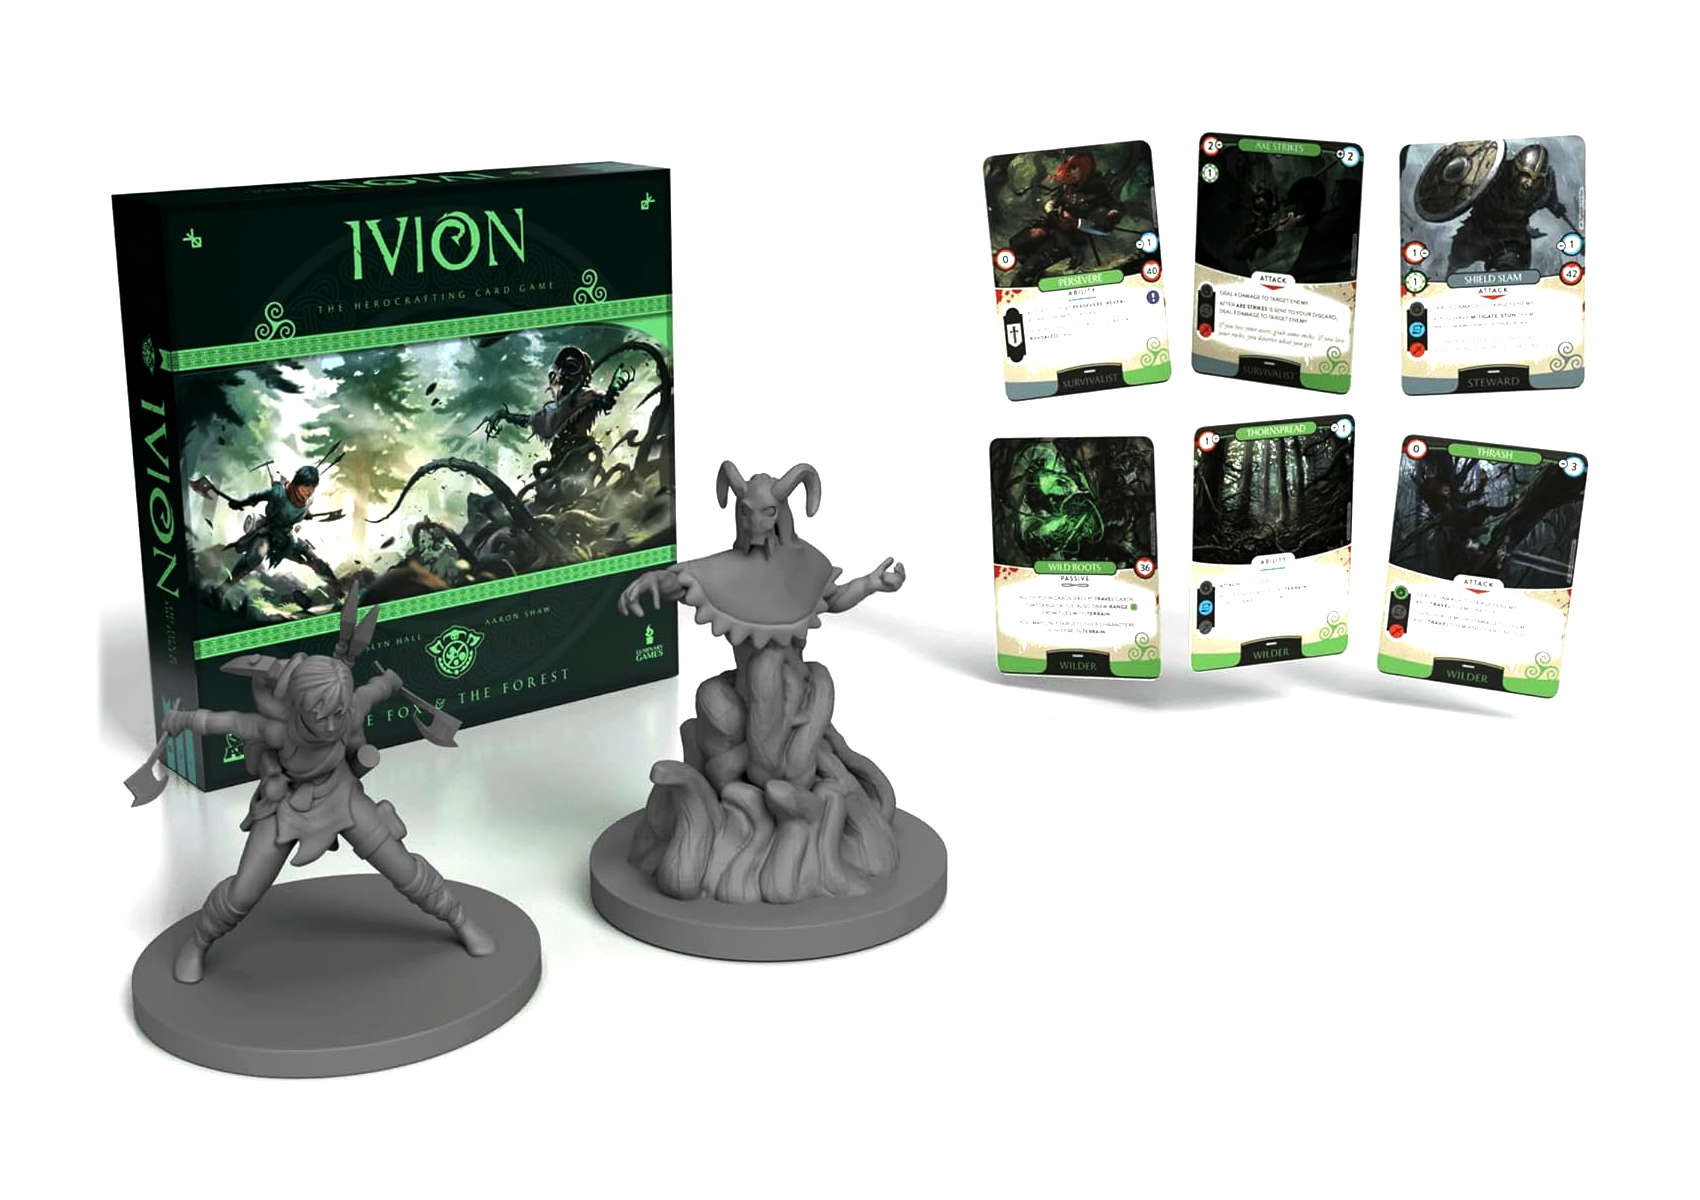 Ivion: The Fox and Тhe Forest